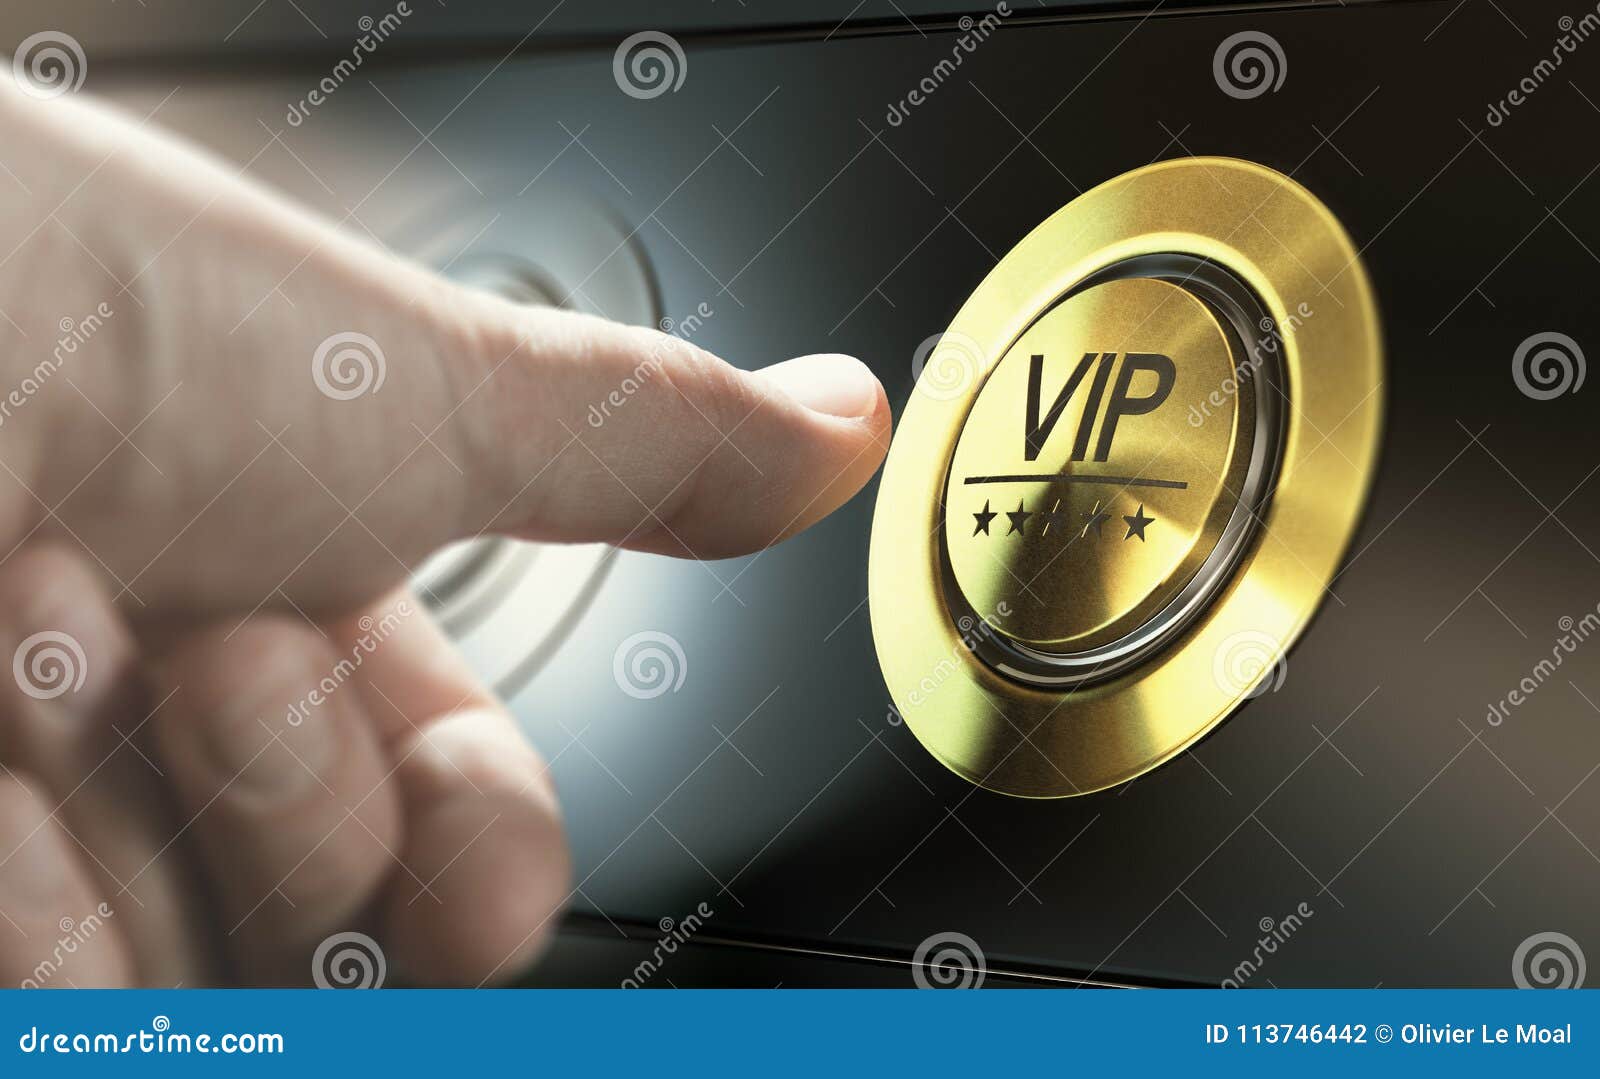 vip access. asking for premium services